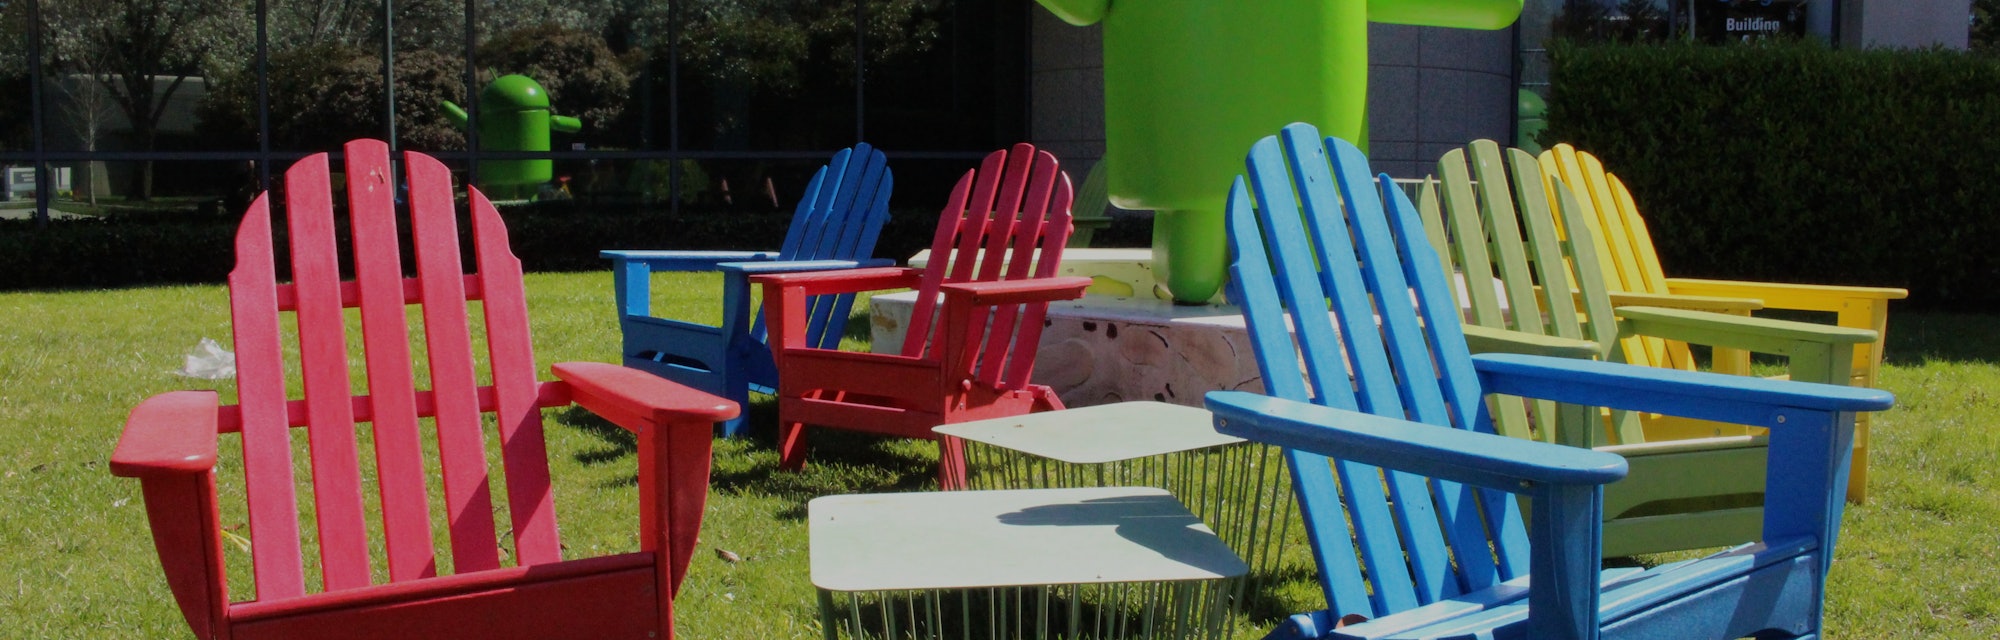 Lawn chairs and a statue at Google's headquarters in Mountain View, California.